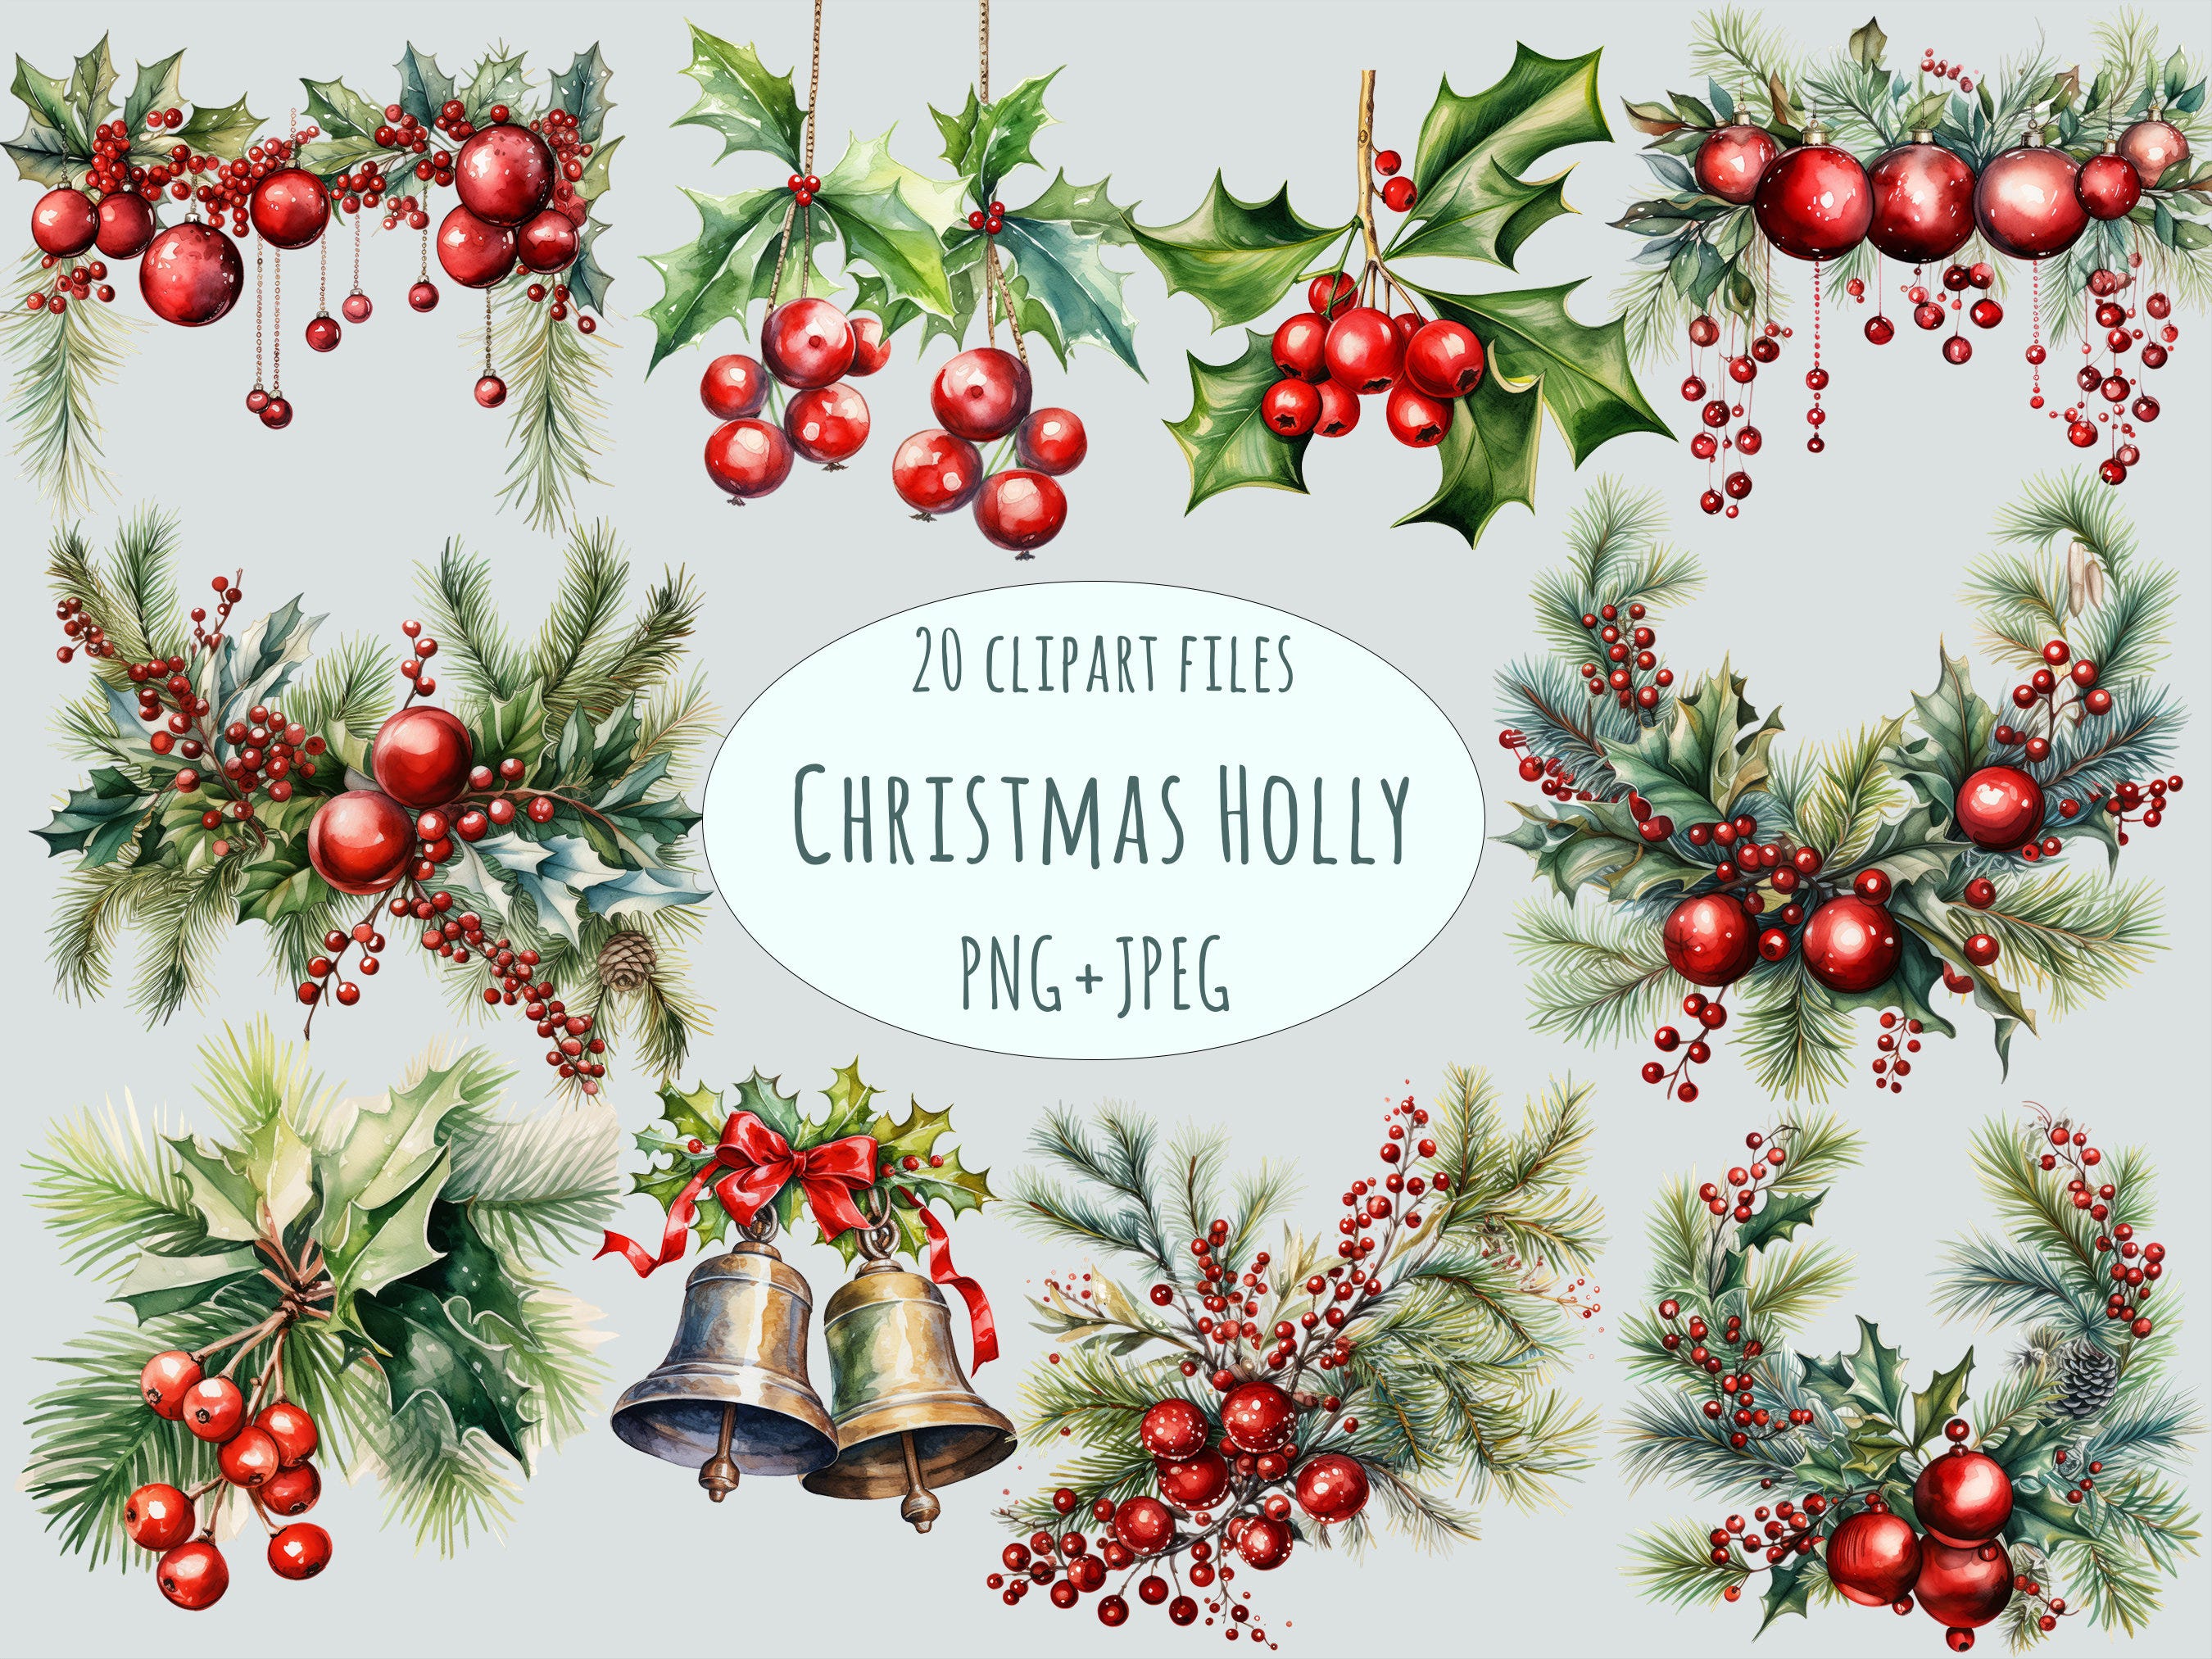 Watercolor Holly clipart, 20 High quality PNG and JPEG, Christmas holly bouquet, Holly berry printable, Jingle bells clipart floral wall art